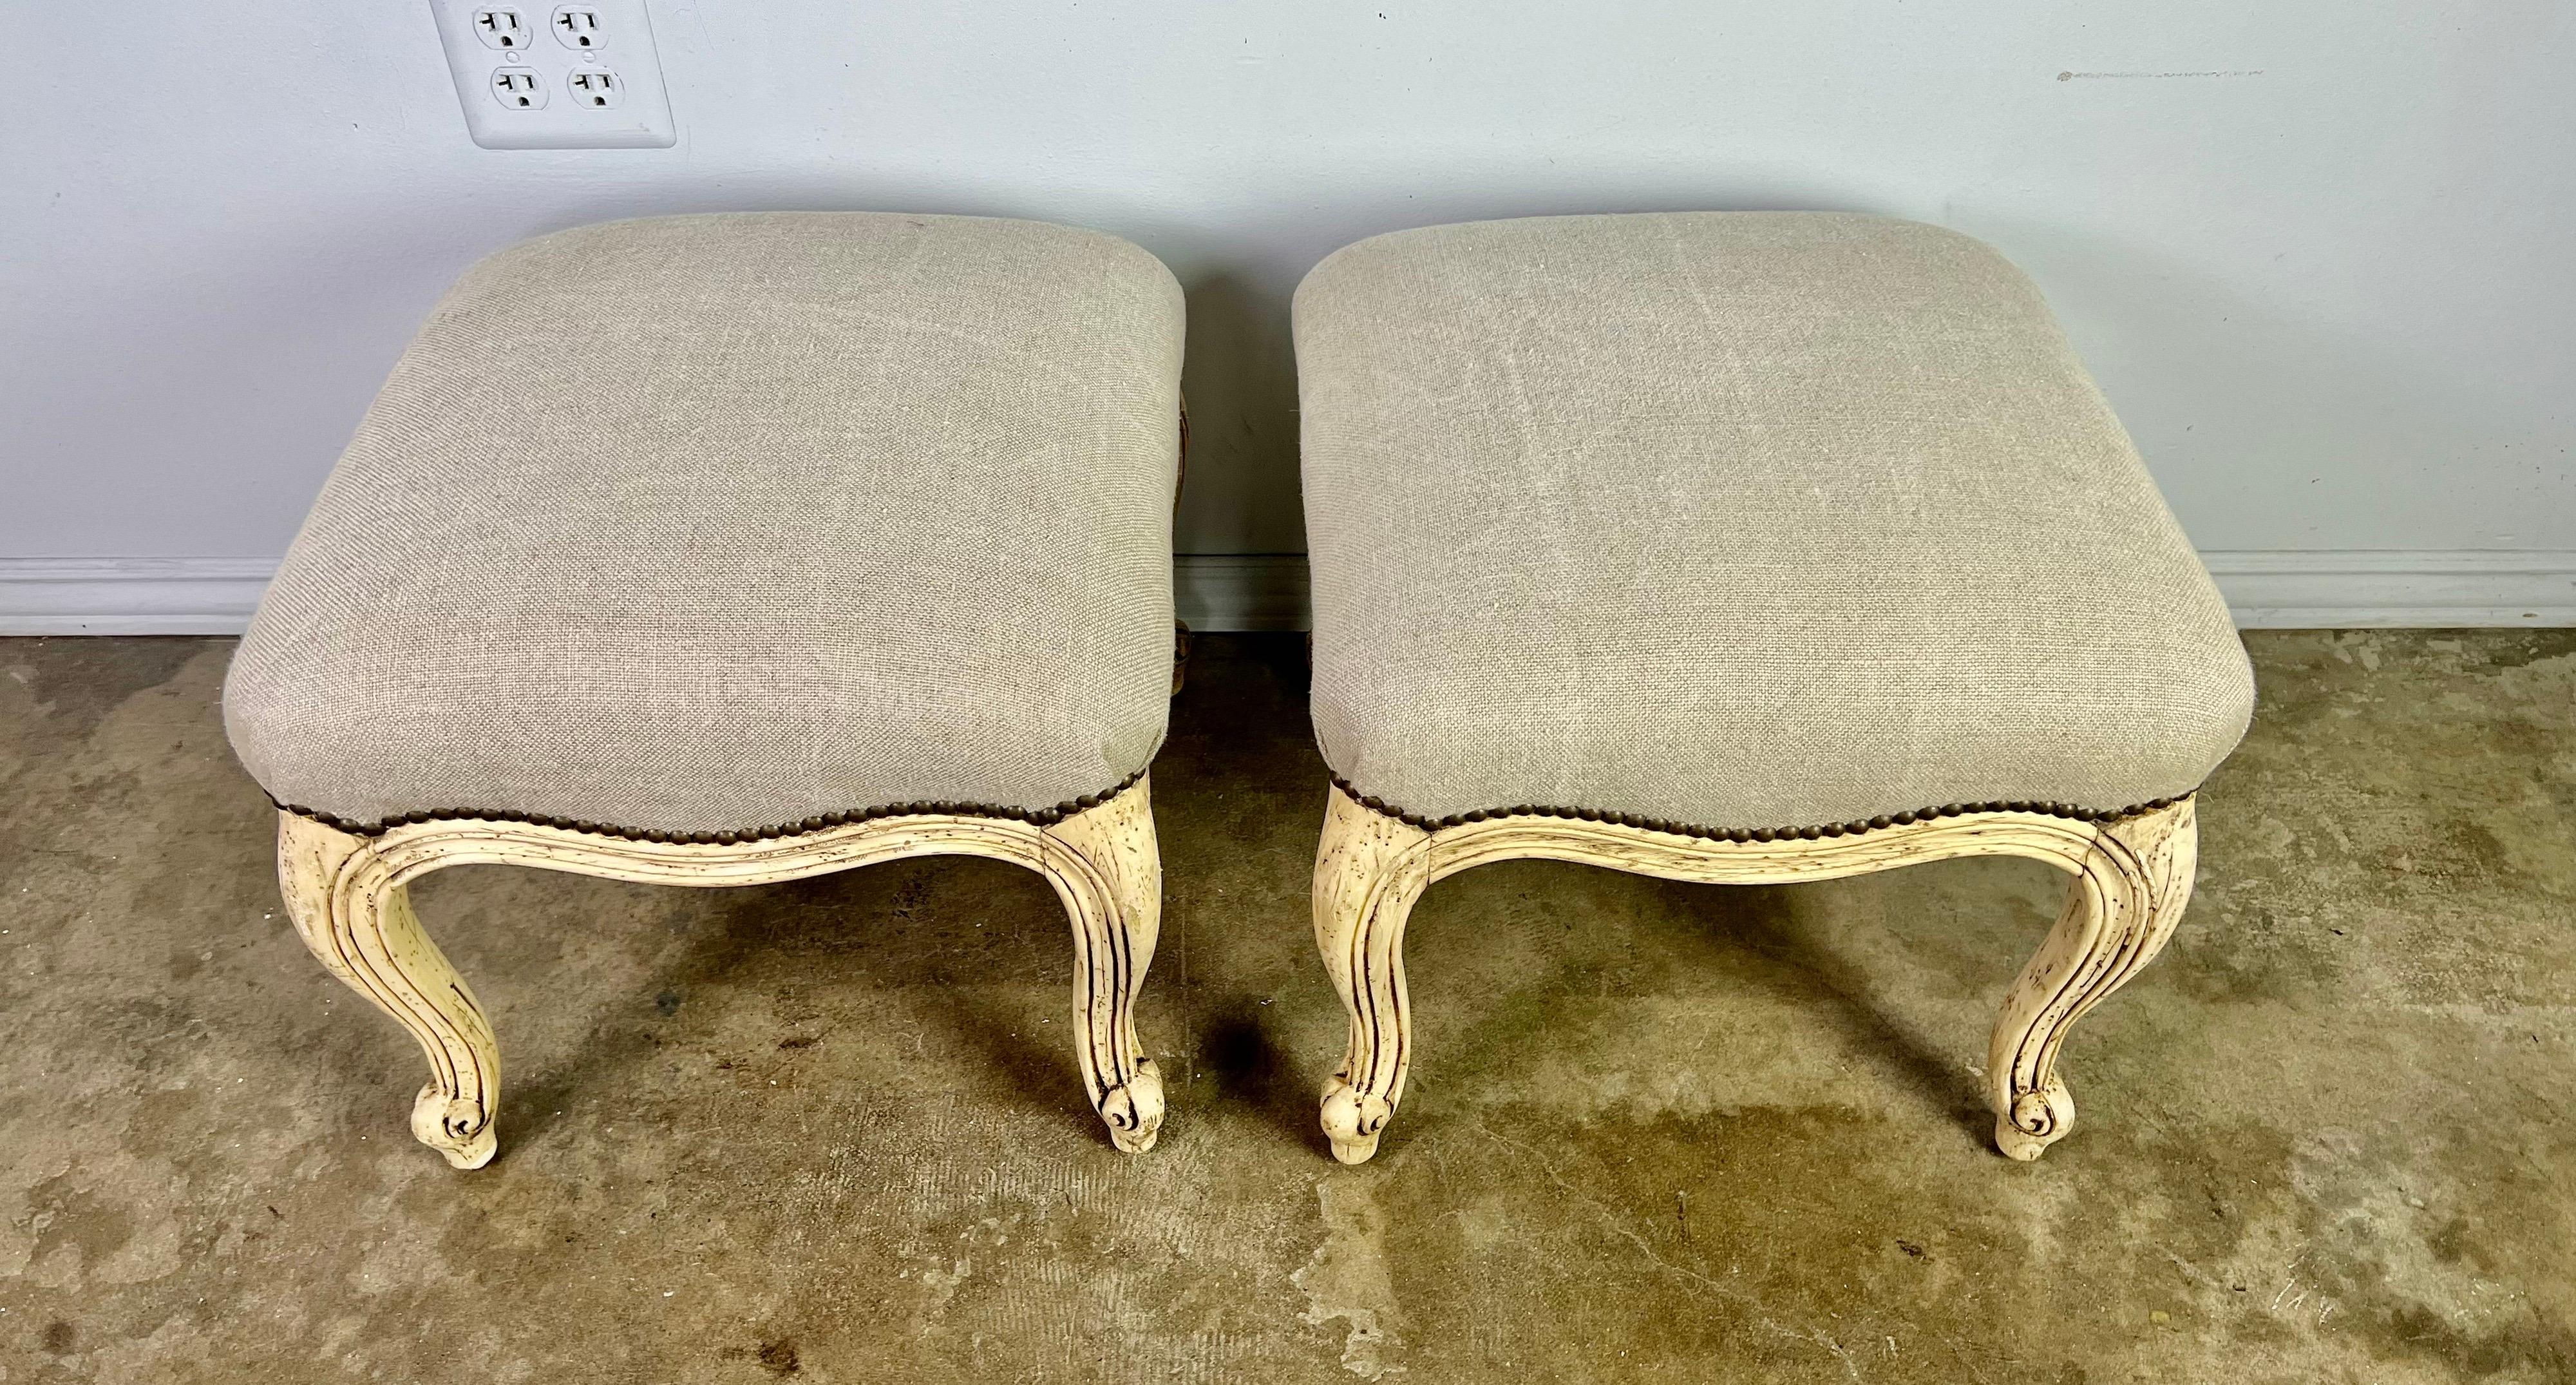 Pair of French painted Louis XV style benches standing on four cabriole legs with rams head feet. The benches are newly upholstered in a washed Belgium linen with nailhead trim detail.